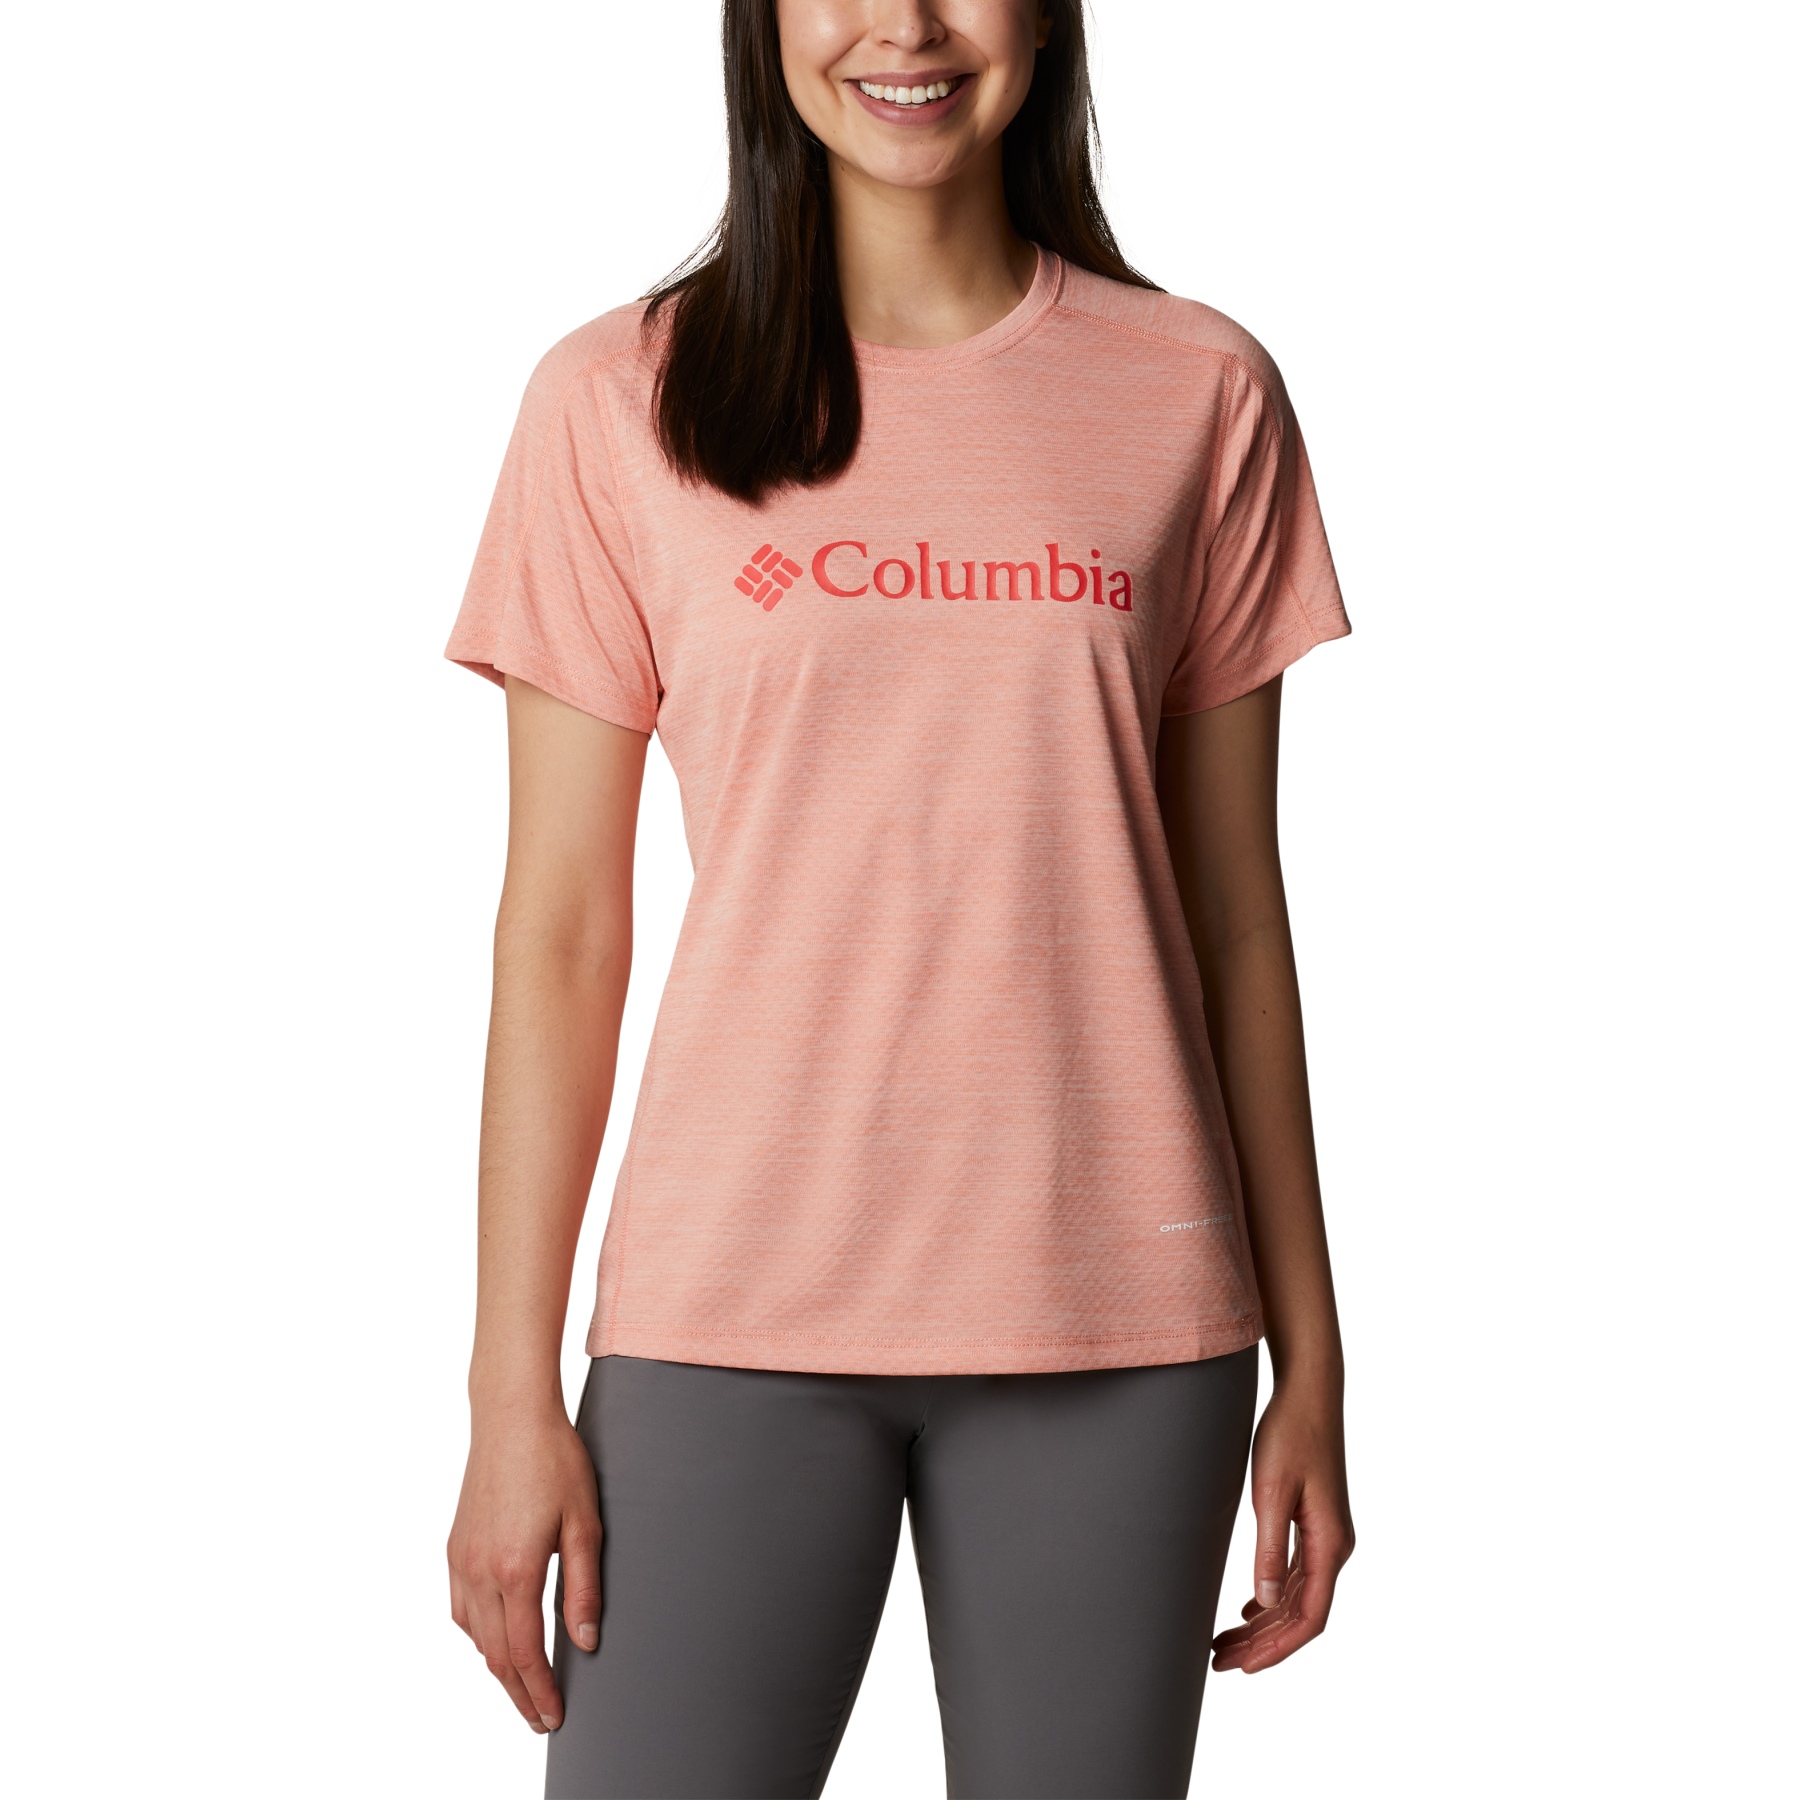 Picture of Columbia Zero Rules Graphic Crew T-Shirt Women - Coral Reef Heather Gem Columbia